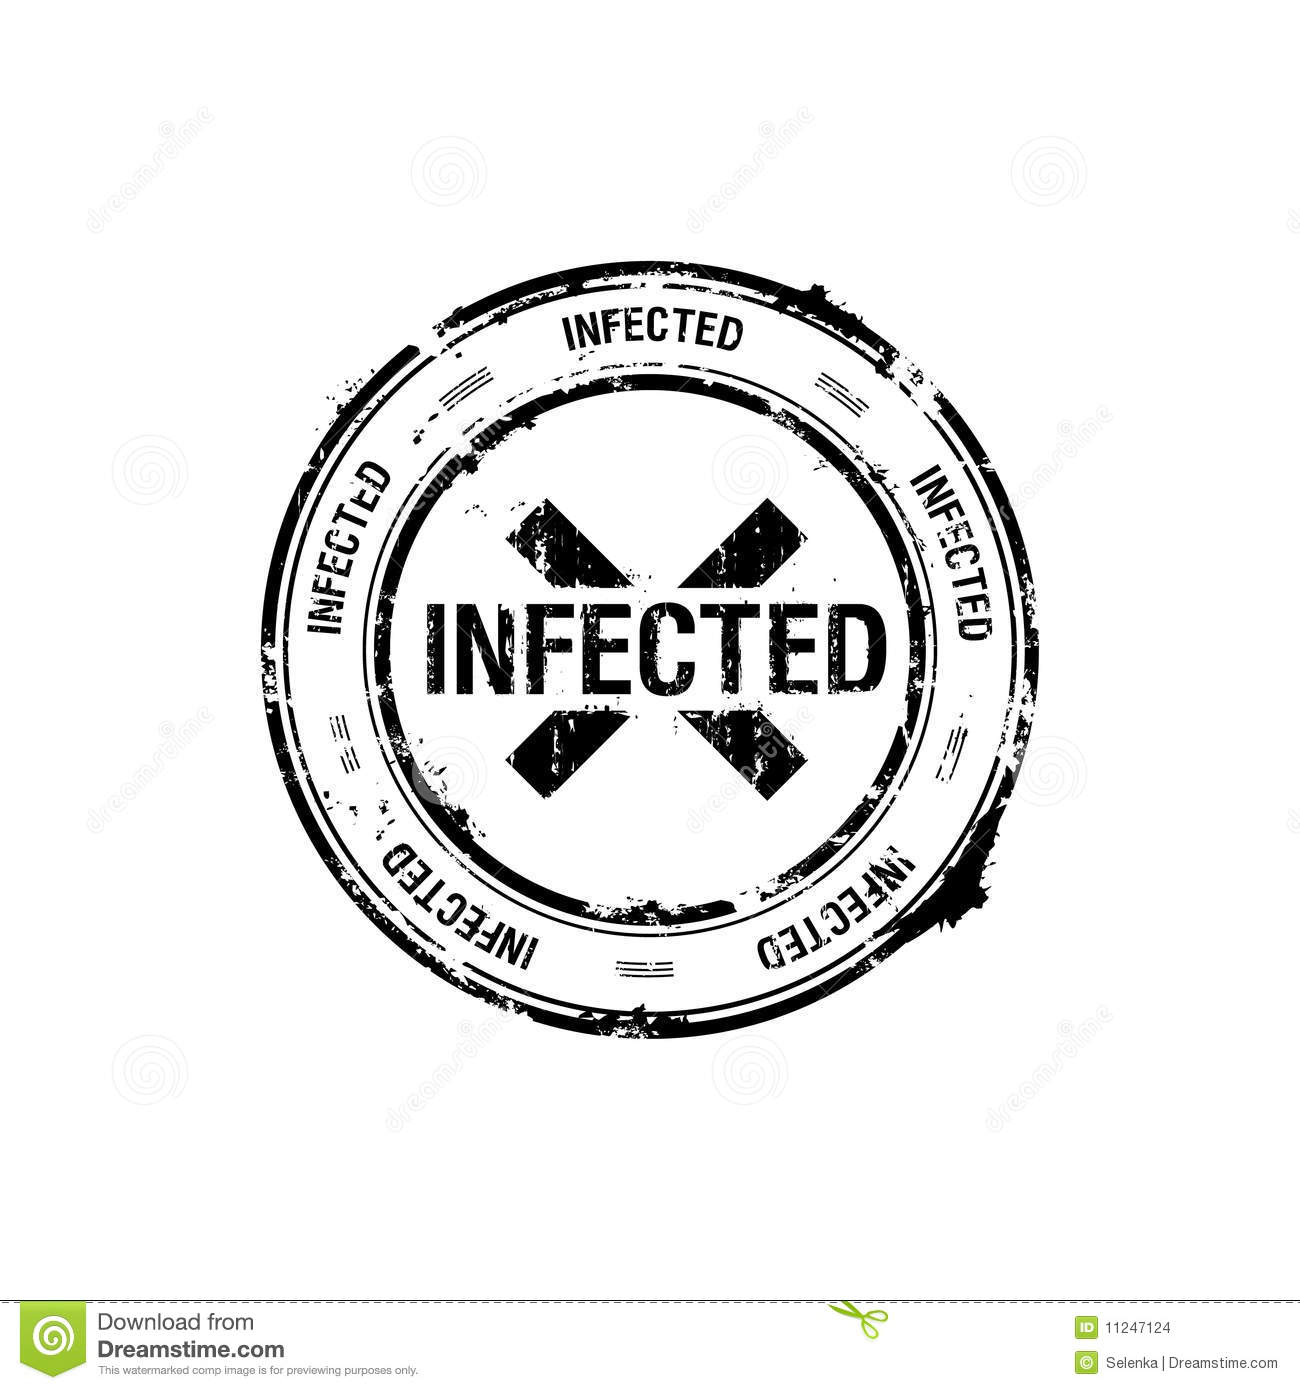 Infected #1